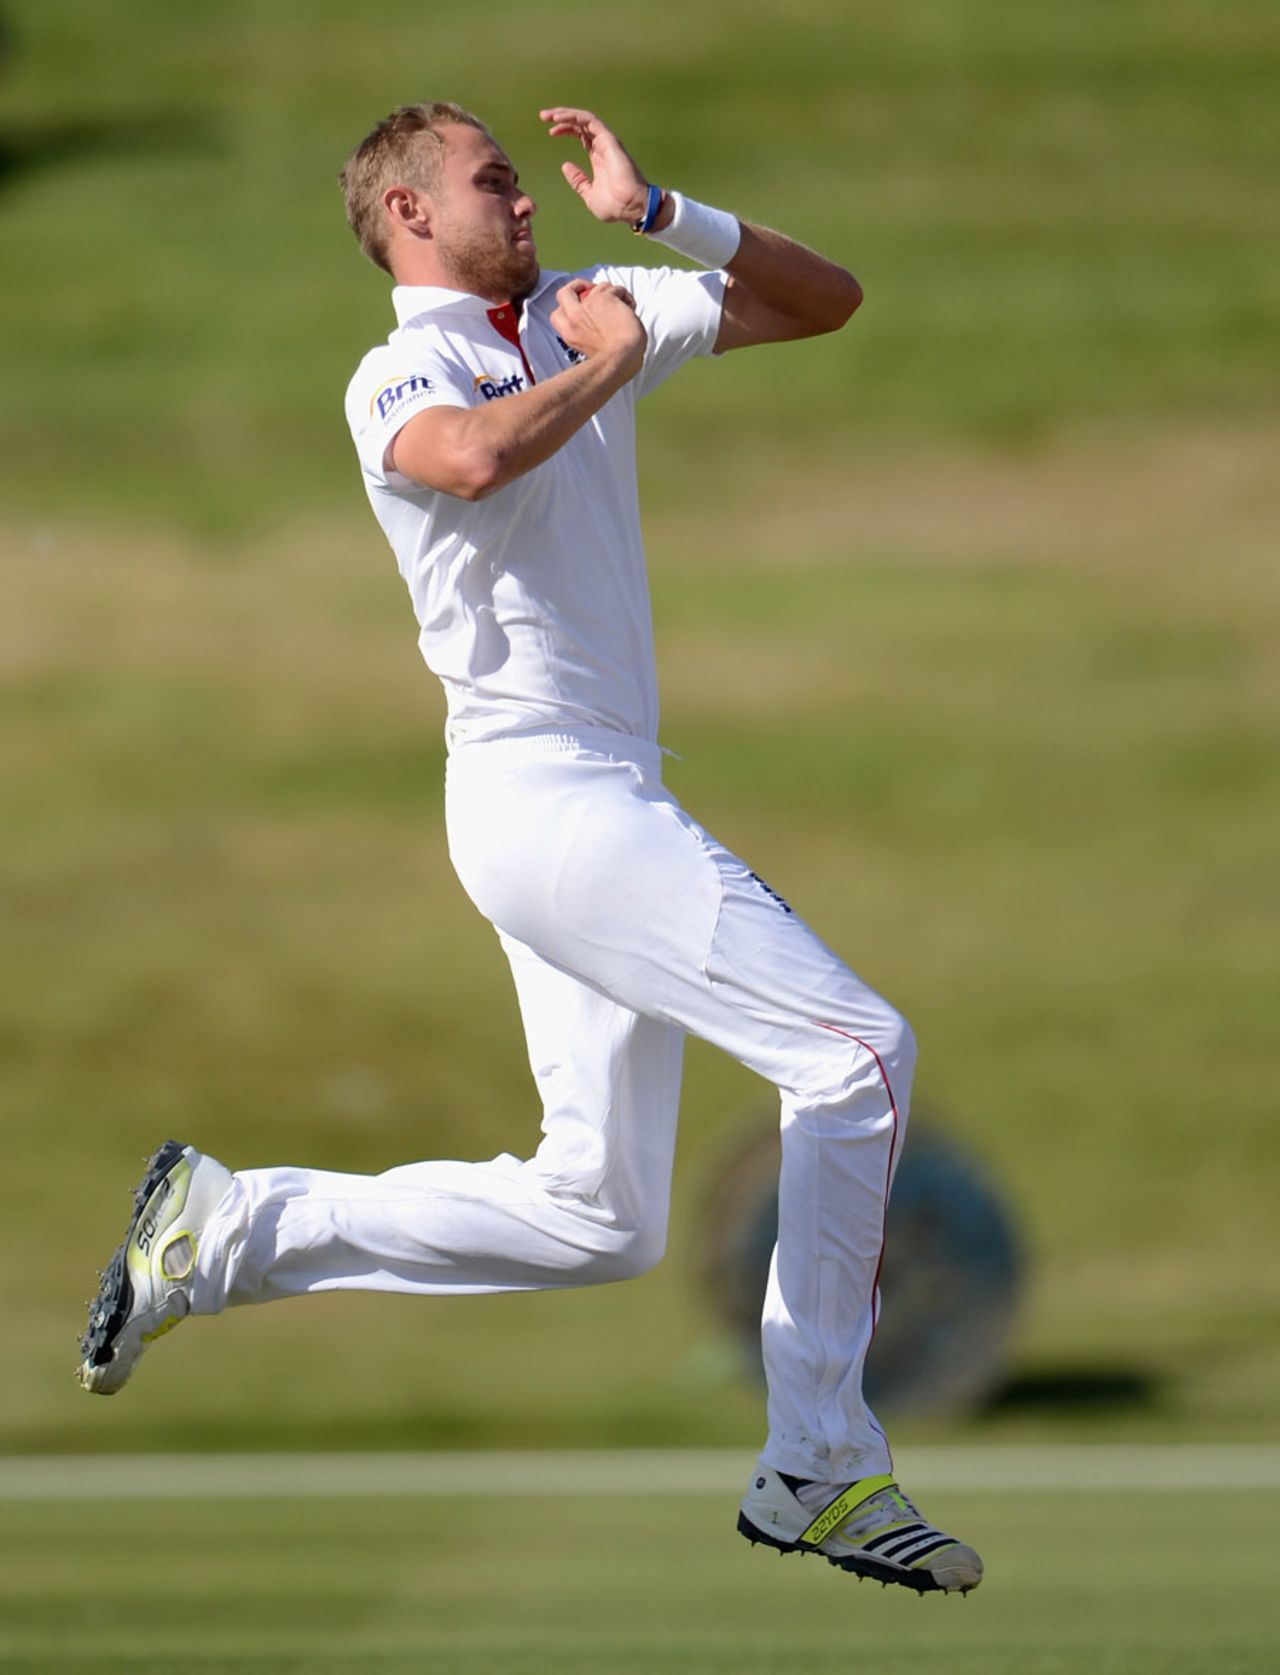 Stuart Broad runs in to bowl against New Zealand XI, New Zealand XI v England XI, 2nd day, Tour match, Queenstown